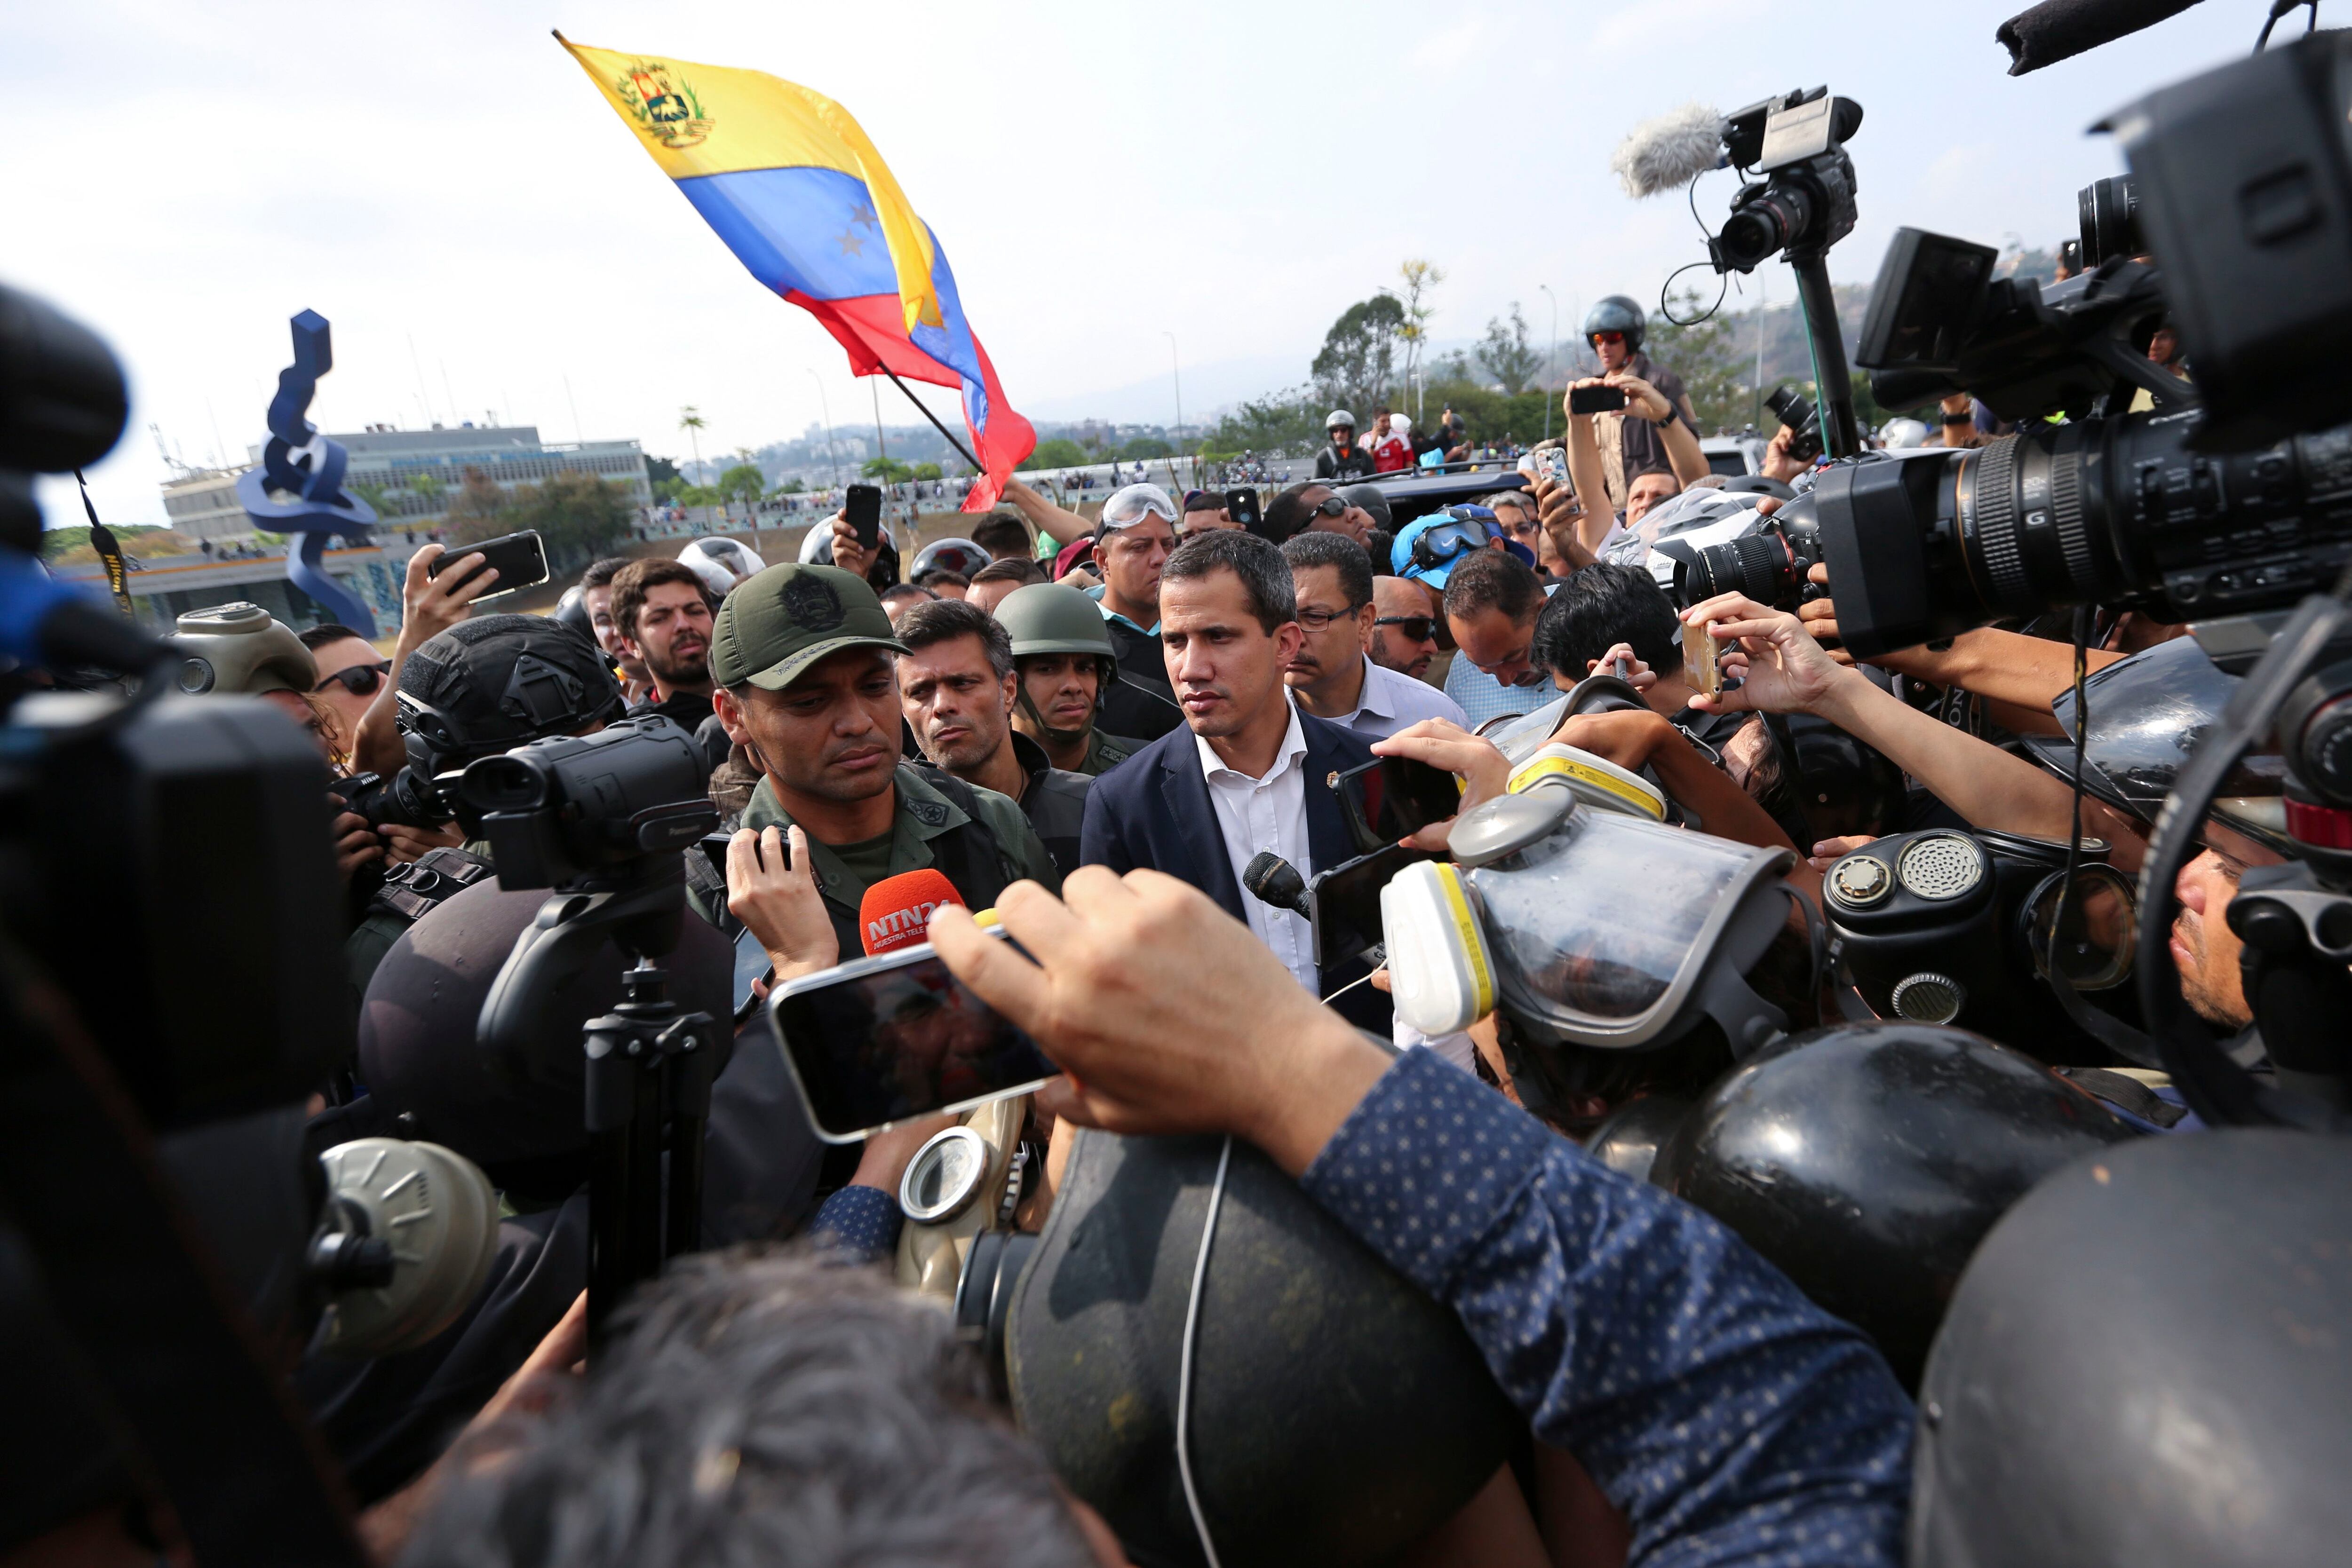 Venezuela's opposition leader and self-proclaimed president Juan Guaido, center, stands with an unidentified military officer who is helping to lead a military uprising, center left, as they talk to the press and supporters outside La Carlota air base in Caracas, Venezuela, Tuesday, April 30, 2019. Guaidó took to the streets with activist Leopoldo Lopez and a small contingent of heavily armed troops early Tuesday in a bold and risky call for the military to rise up and oust Maduro. (AP Photo/Fernando Llano)